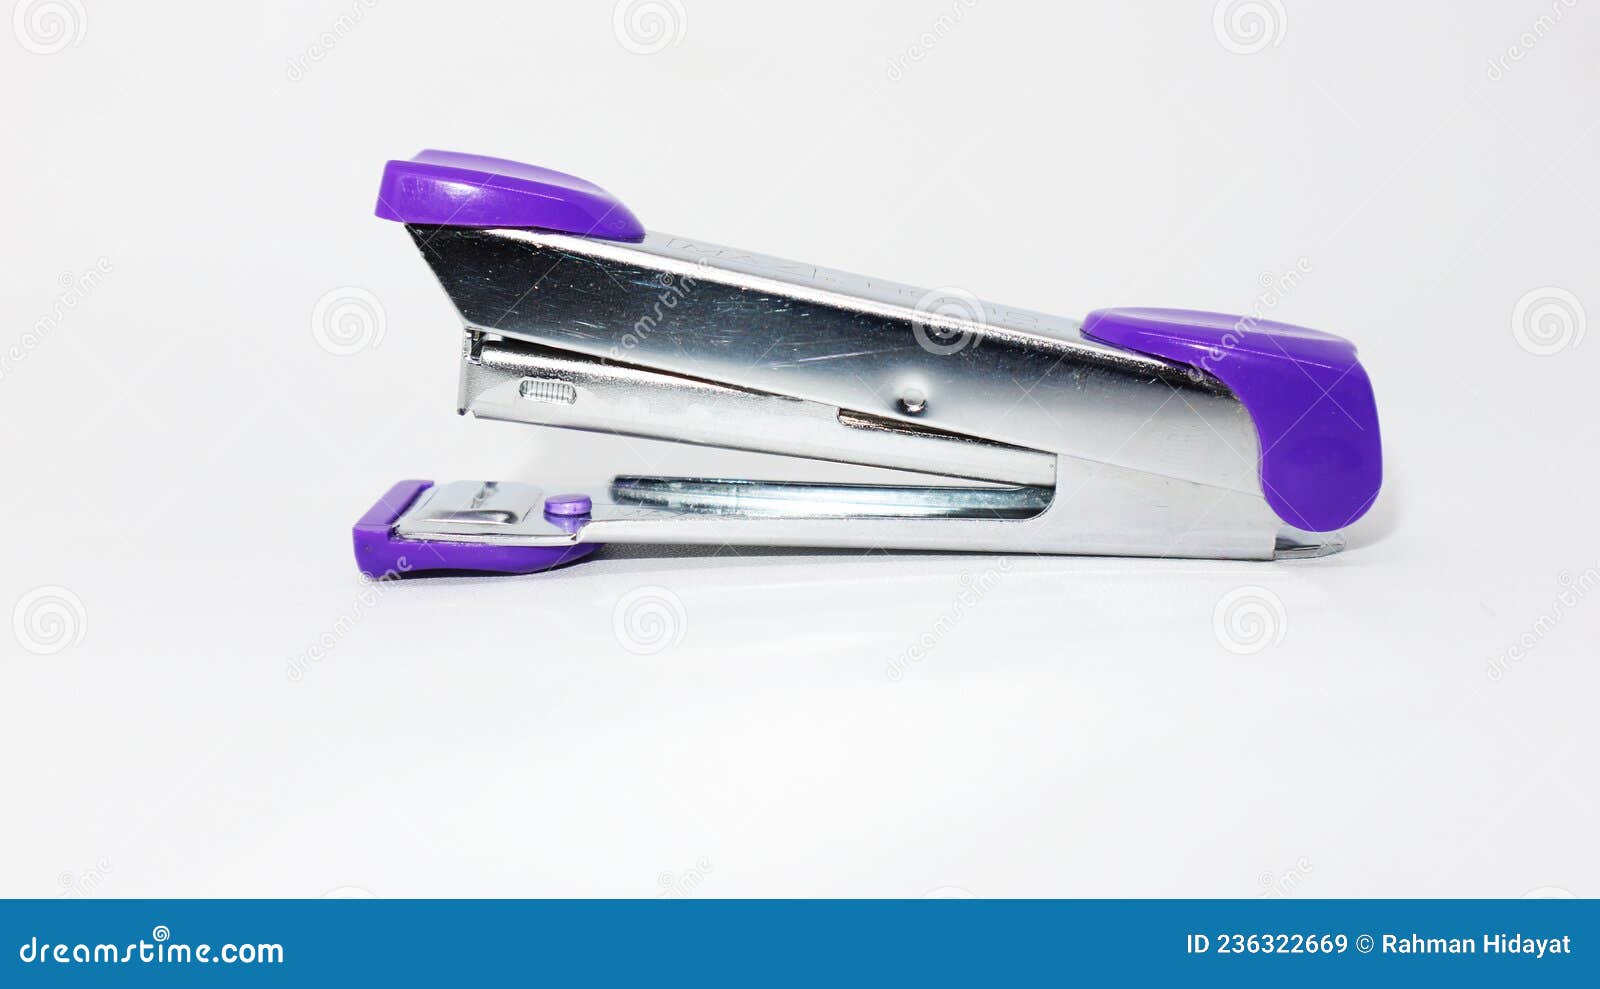 Purple Stapler Office Stationery Isolated Stock Image - Image of metals,  badge: 236322669